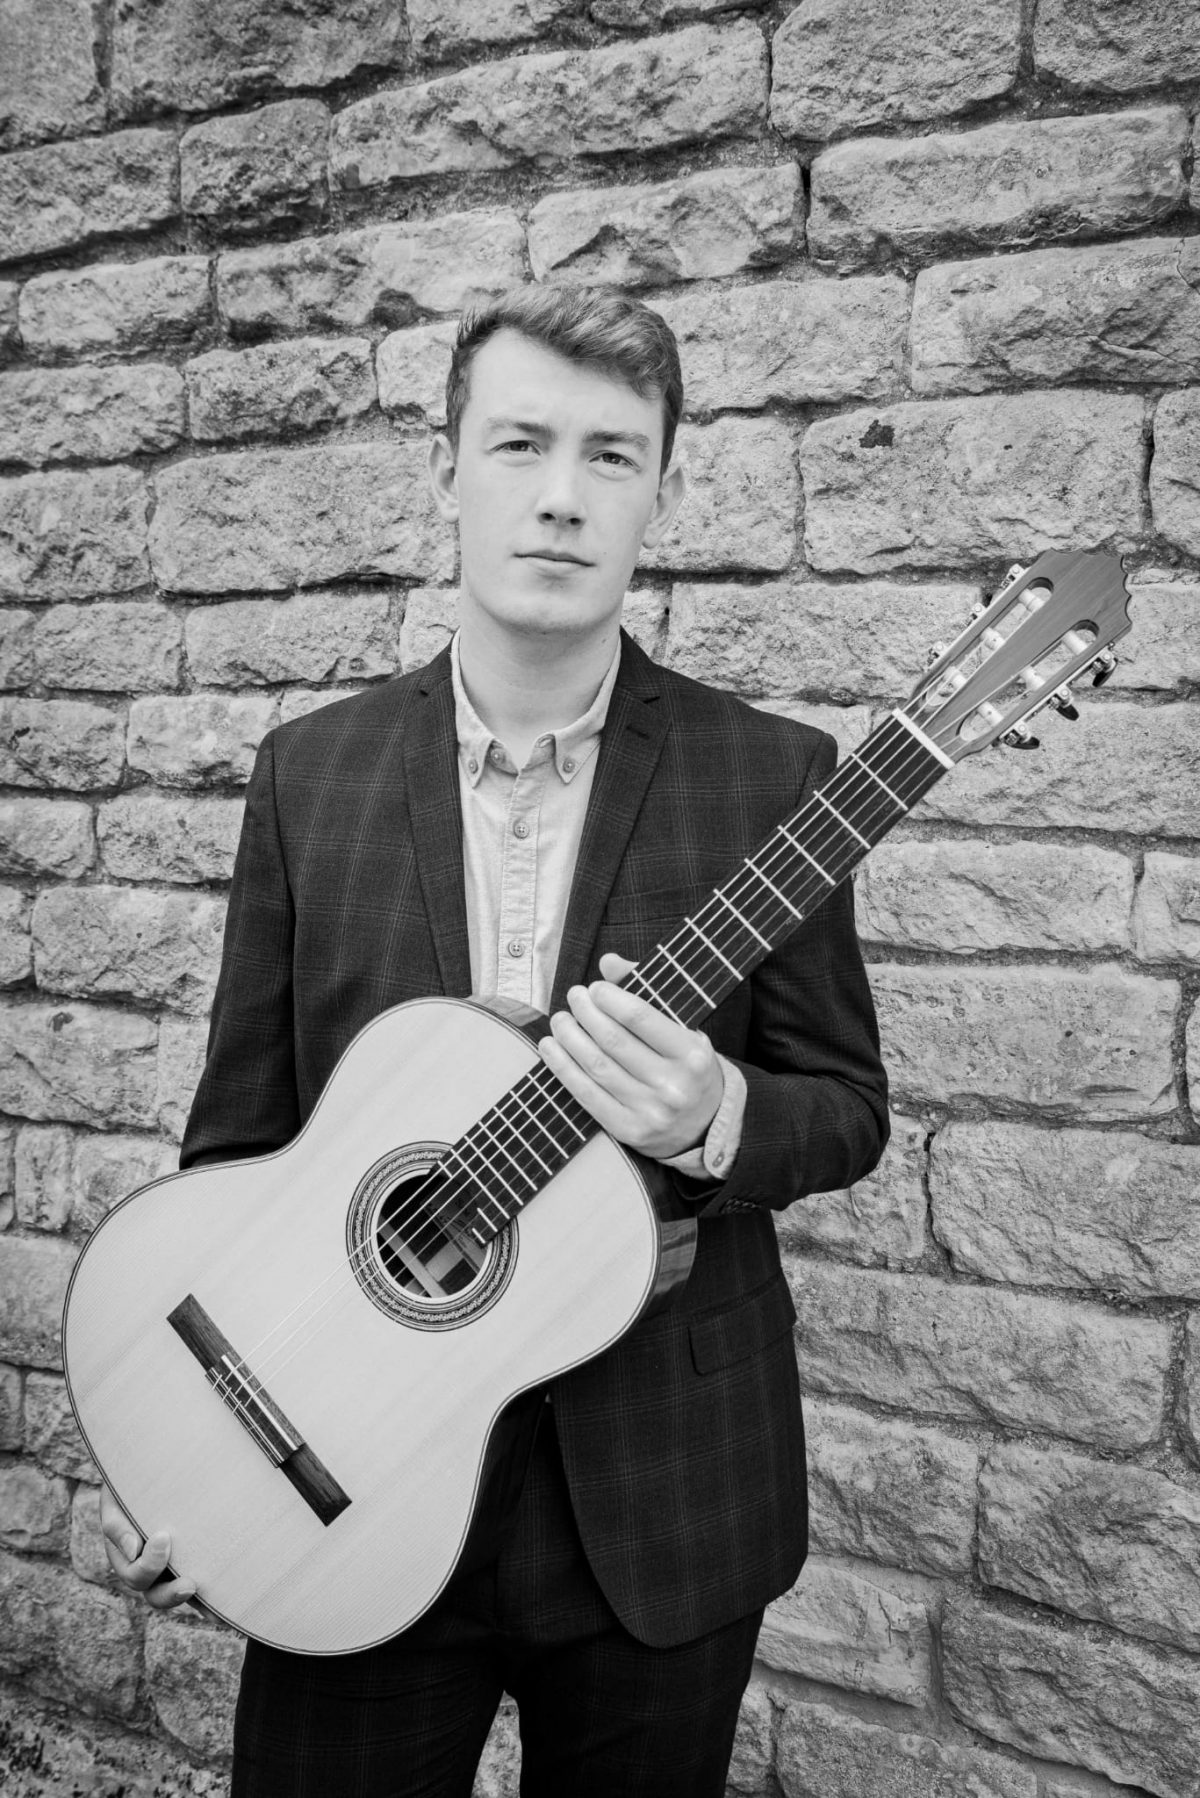 TOM DALE – Guitar this concert will be on 19th March 2024 at 7.30 pm at Boston Grammar School. Tickets are £12 at the door or in advance.  Students and children have free entry to all concerts.  To order tickets in advance please telephone 01205 366018 or contact bostonconcertclub@gmail.com.  There is ample parking at the entrance off Rowley Road.